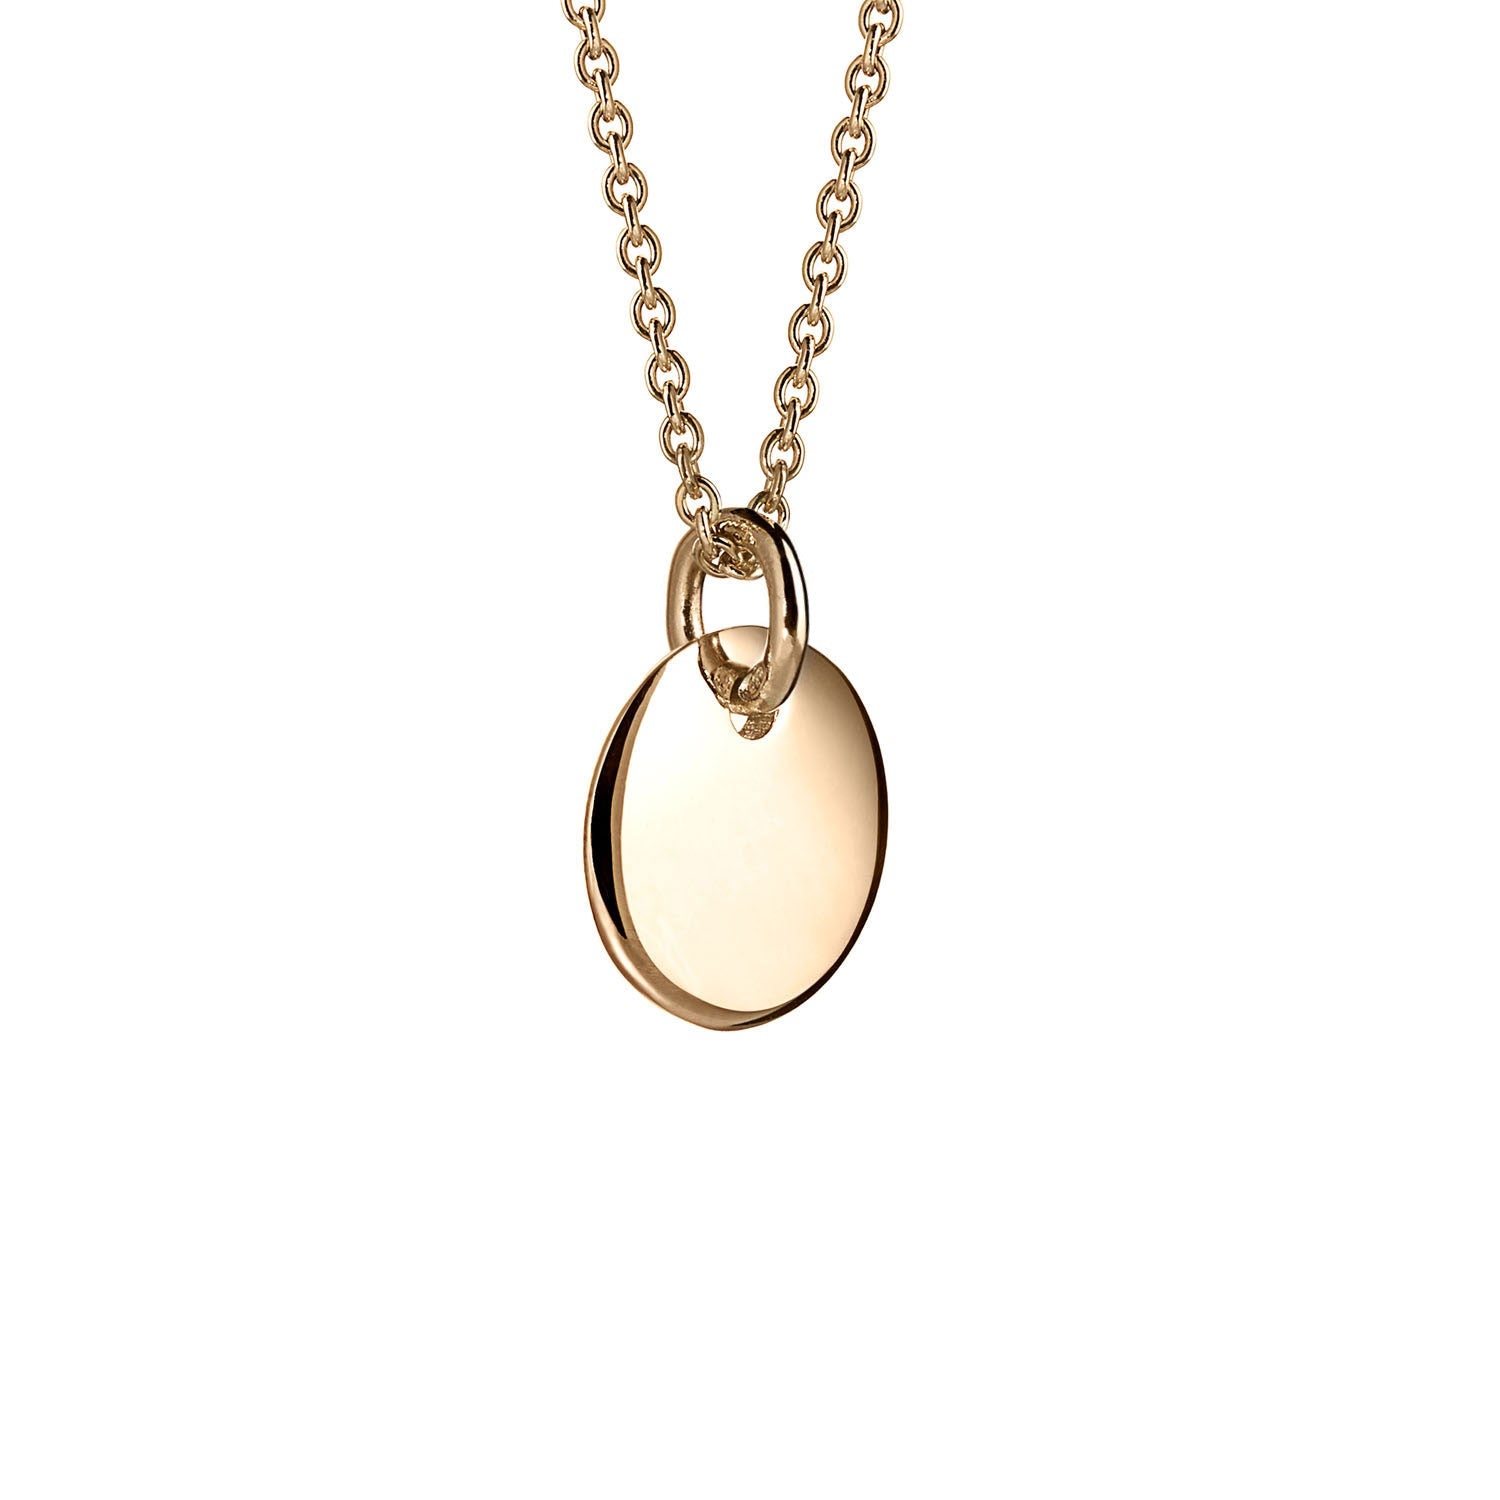 Smooth disk pendant necklace